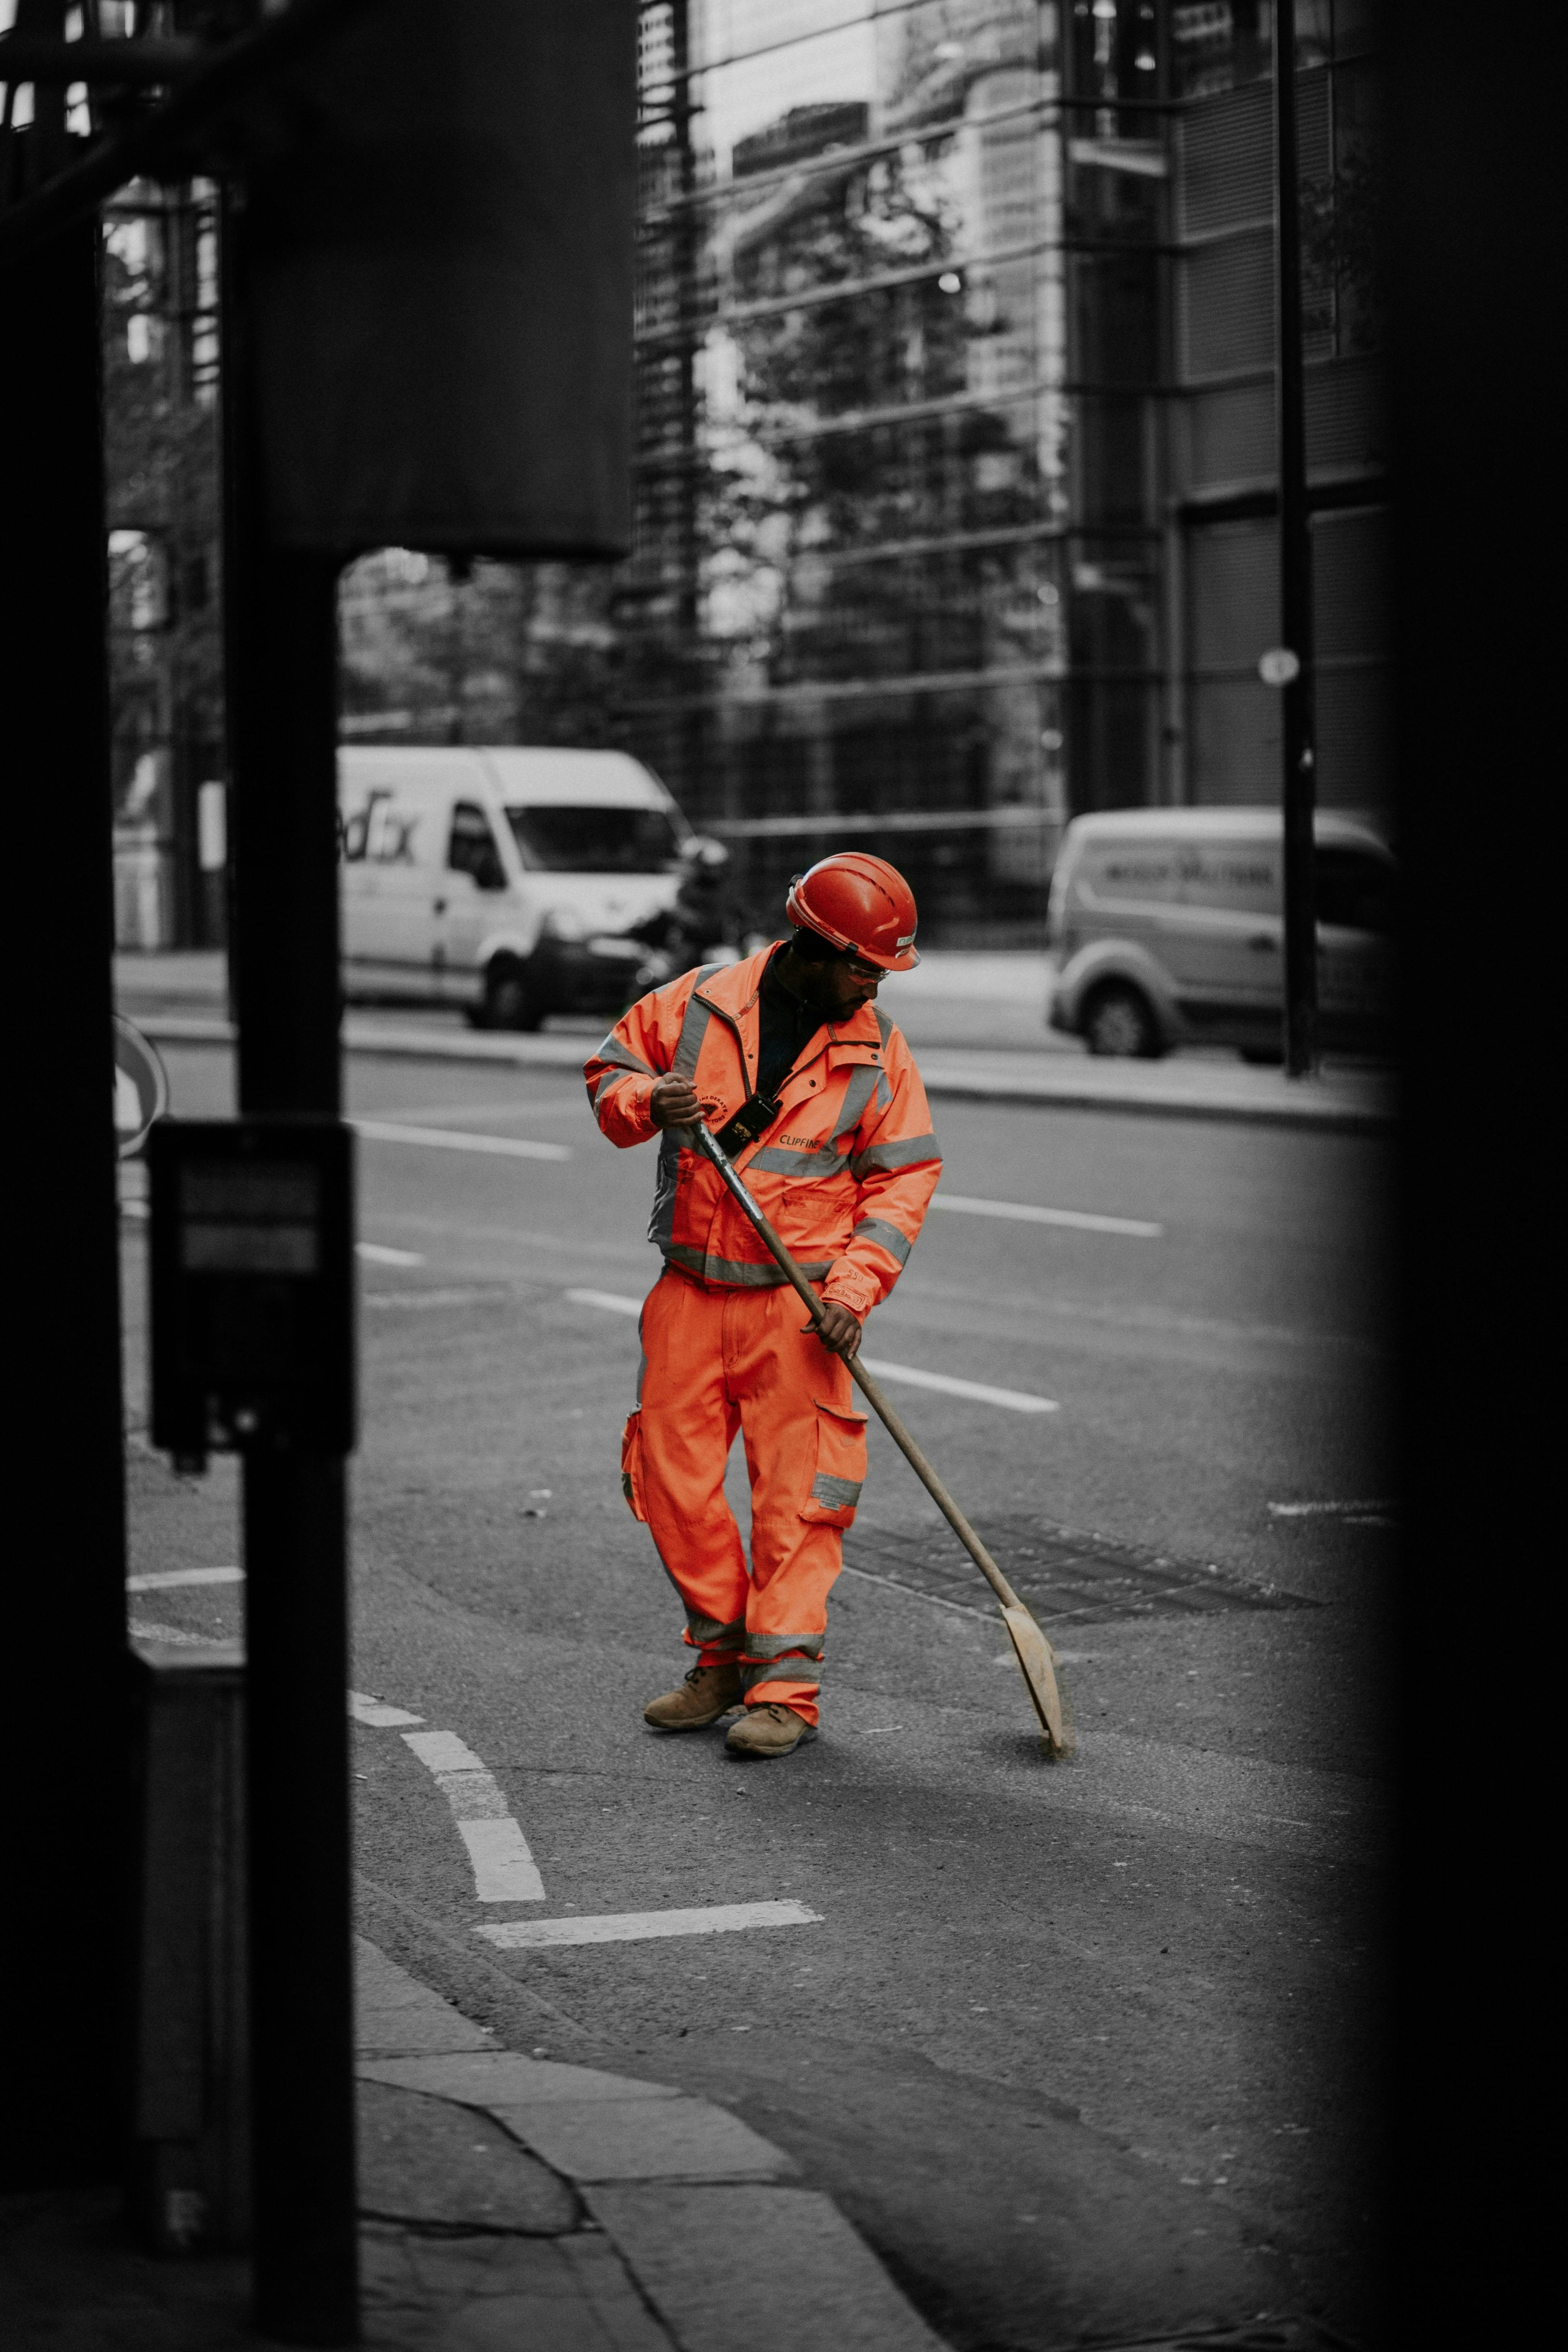 Construction worker wearing orange protective clothing and hard hat removing material from road using a shovel